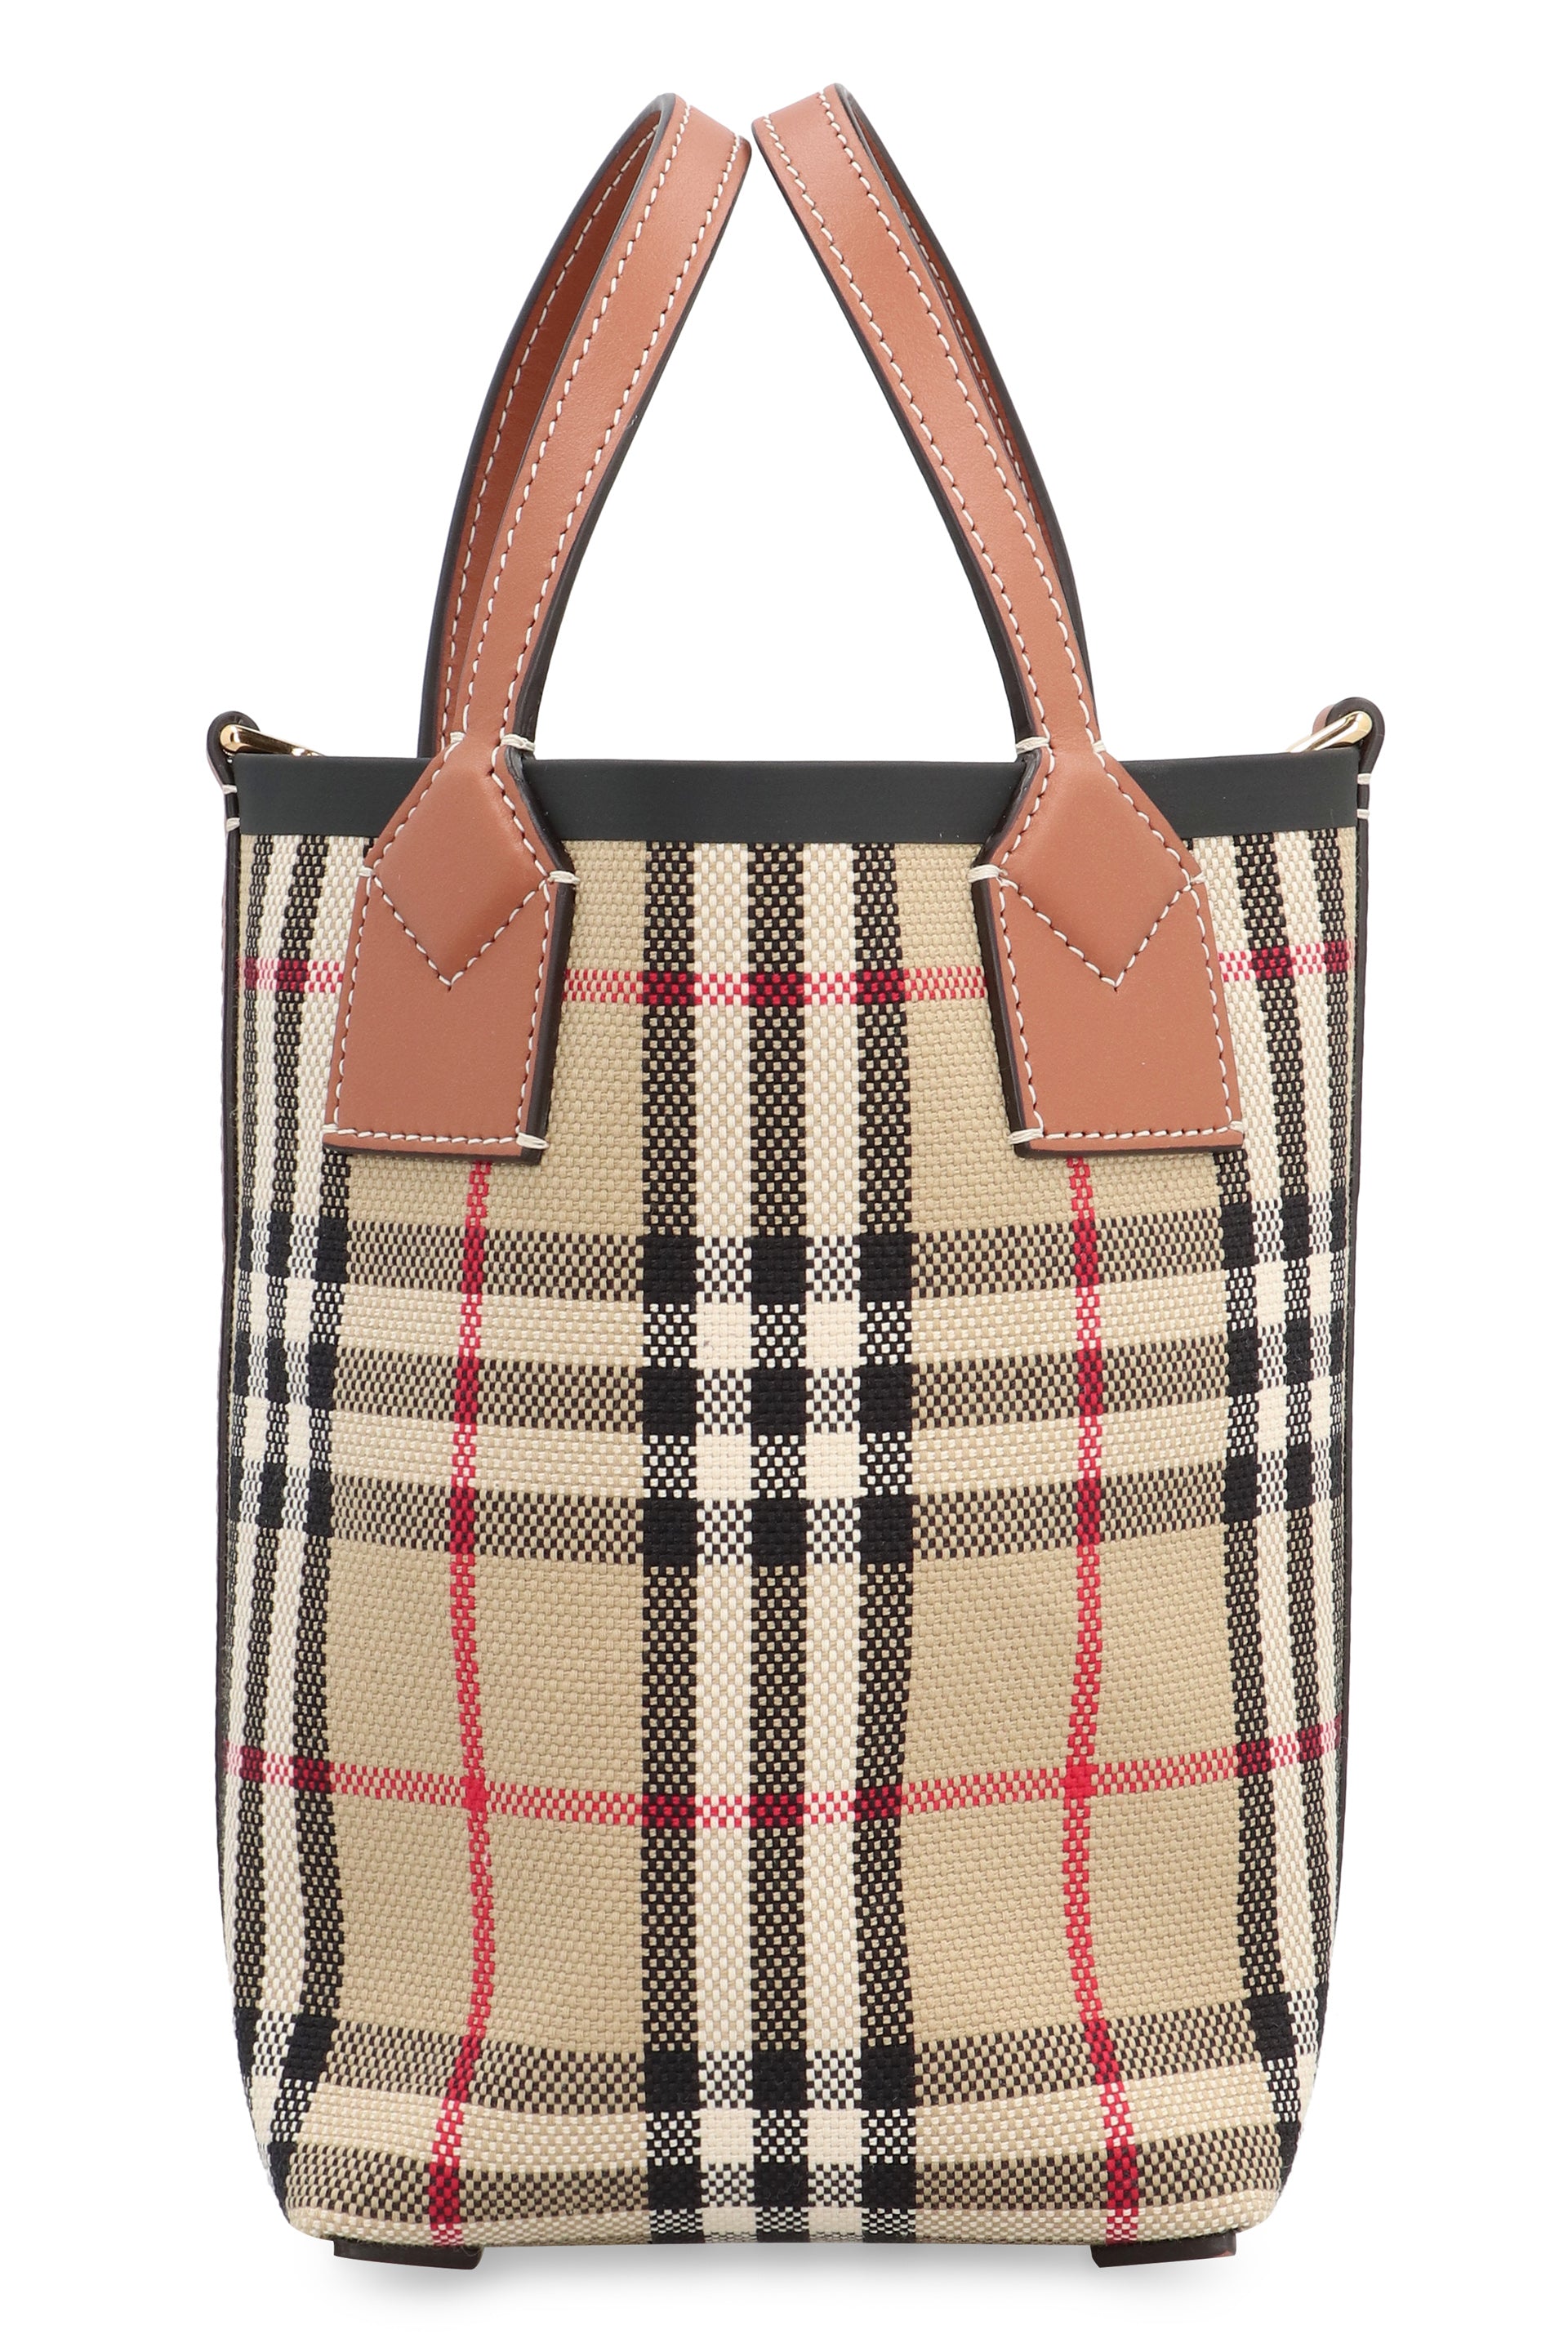 Shop Burberry Small Vintage Check Tote Handbag With Leather Handles And Removable Strap In Beige